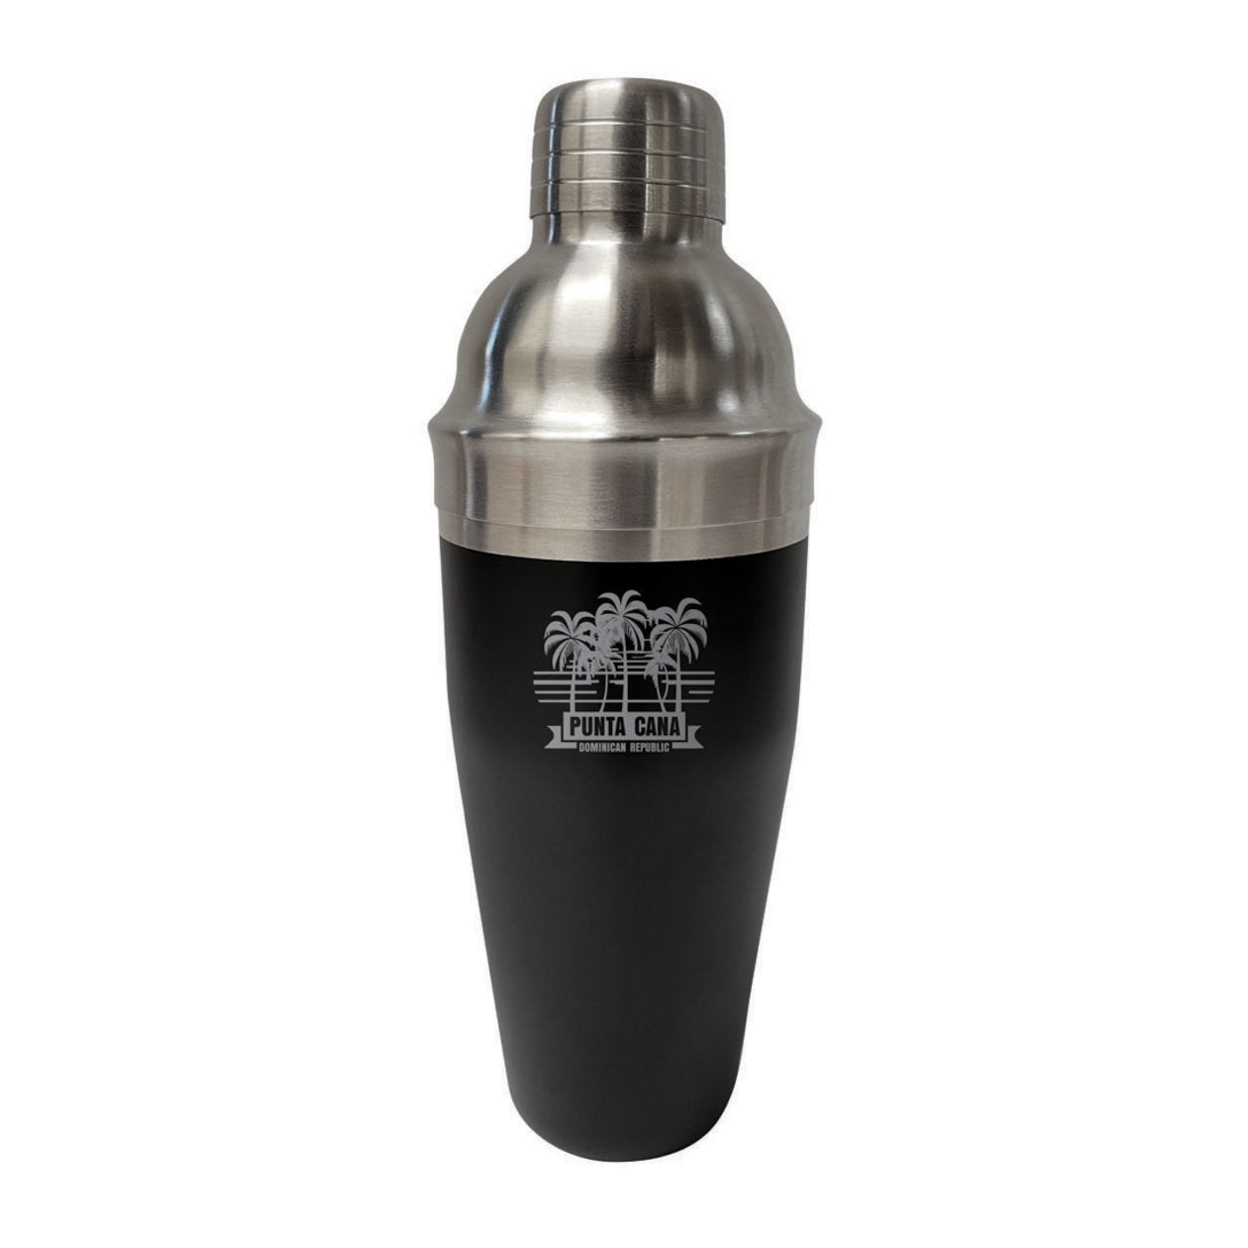 Punta Cana Dominican Republic Souvenir 24 Oz Stainless Steel Cocktail Shaker - Palm 2